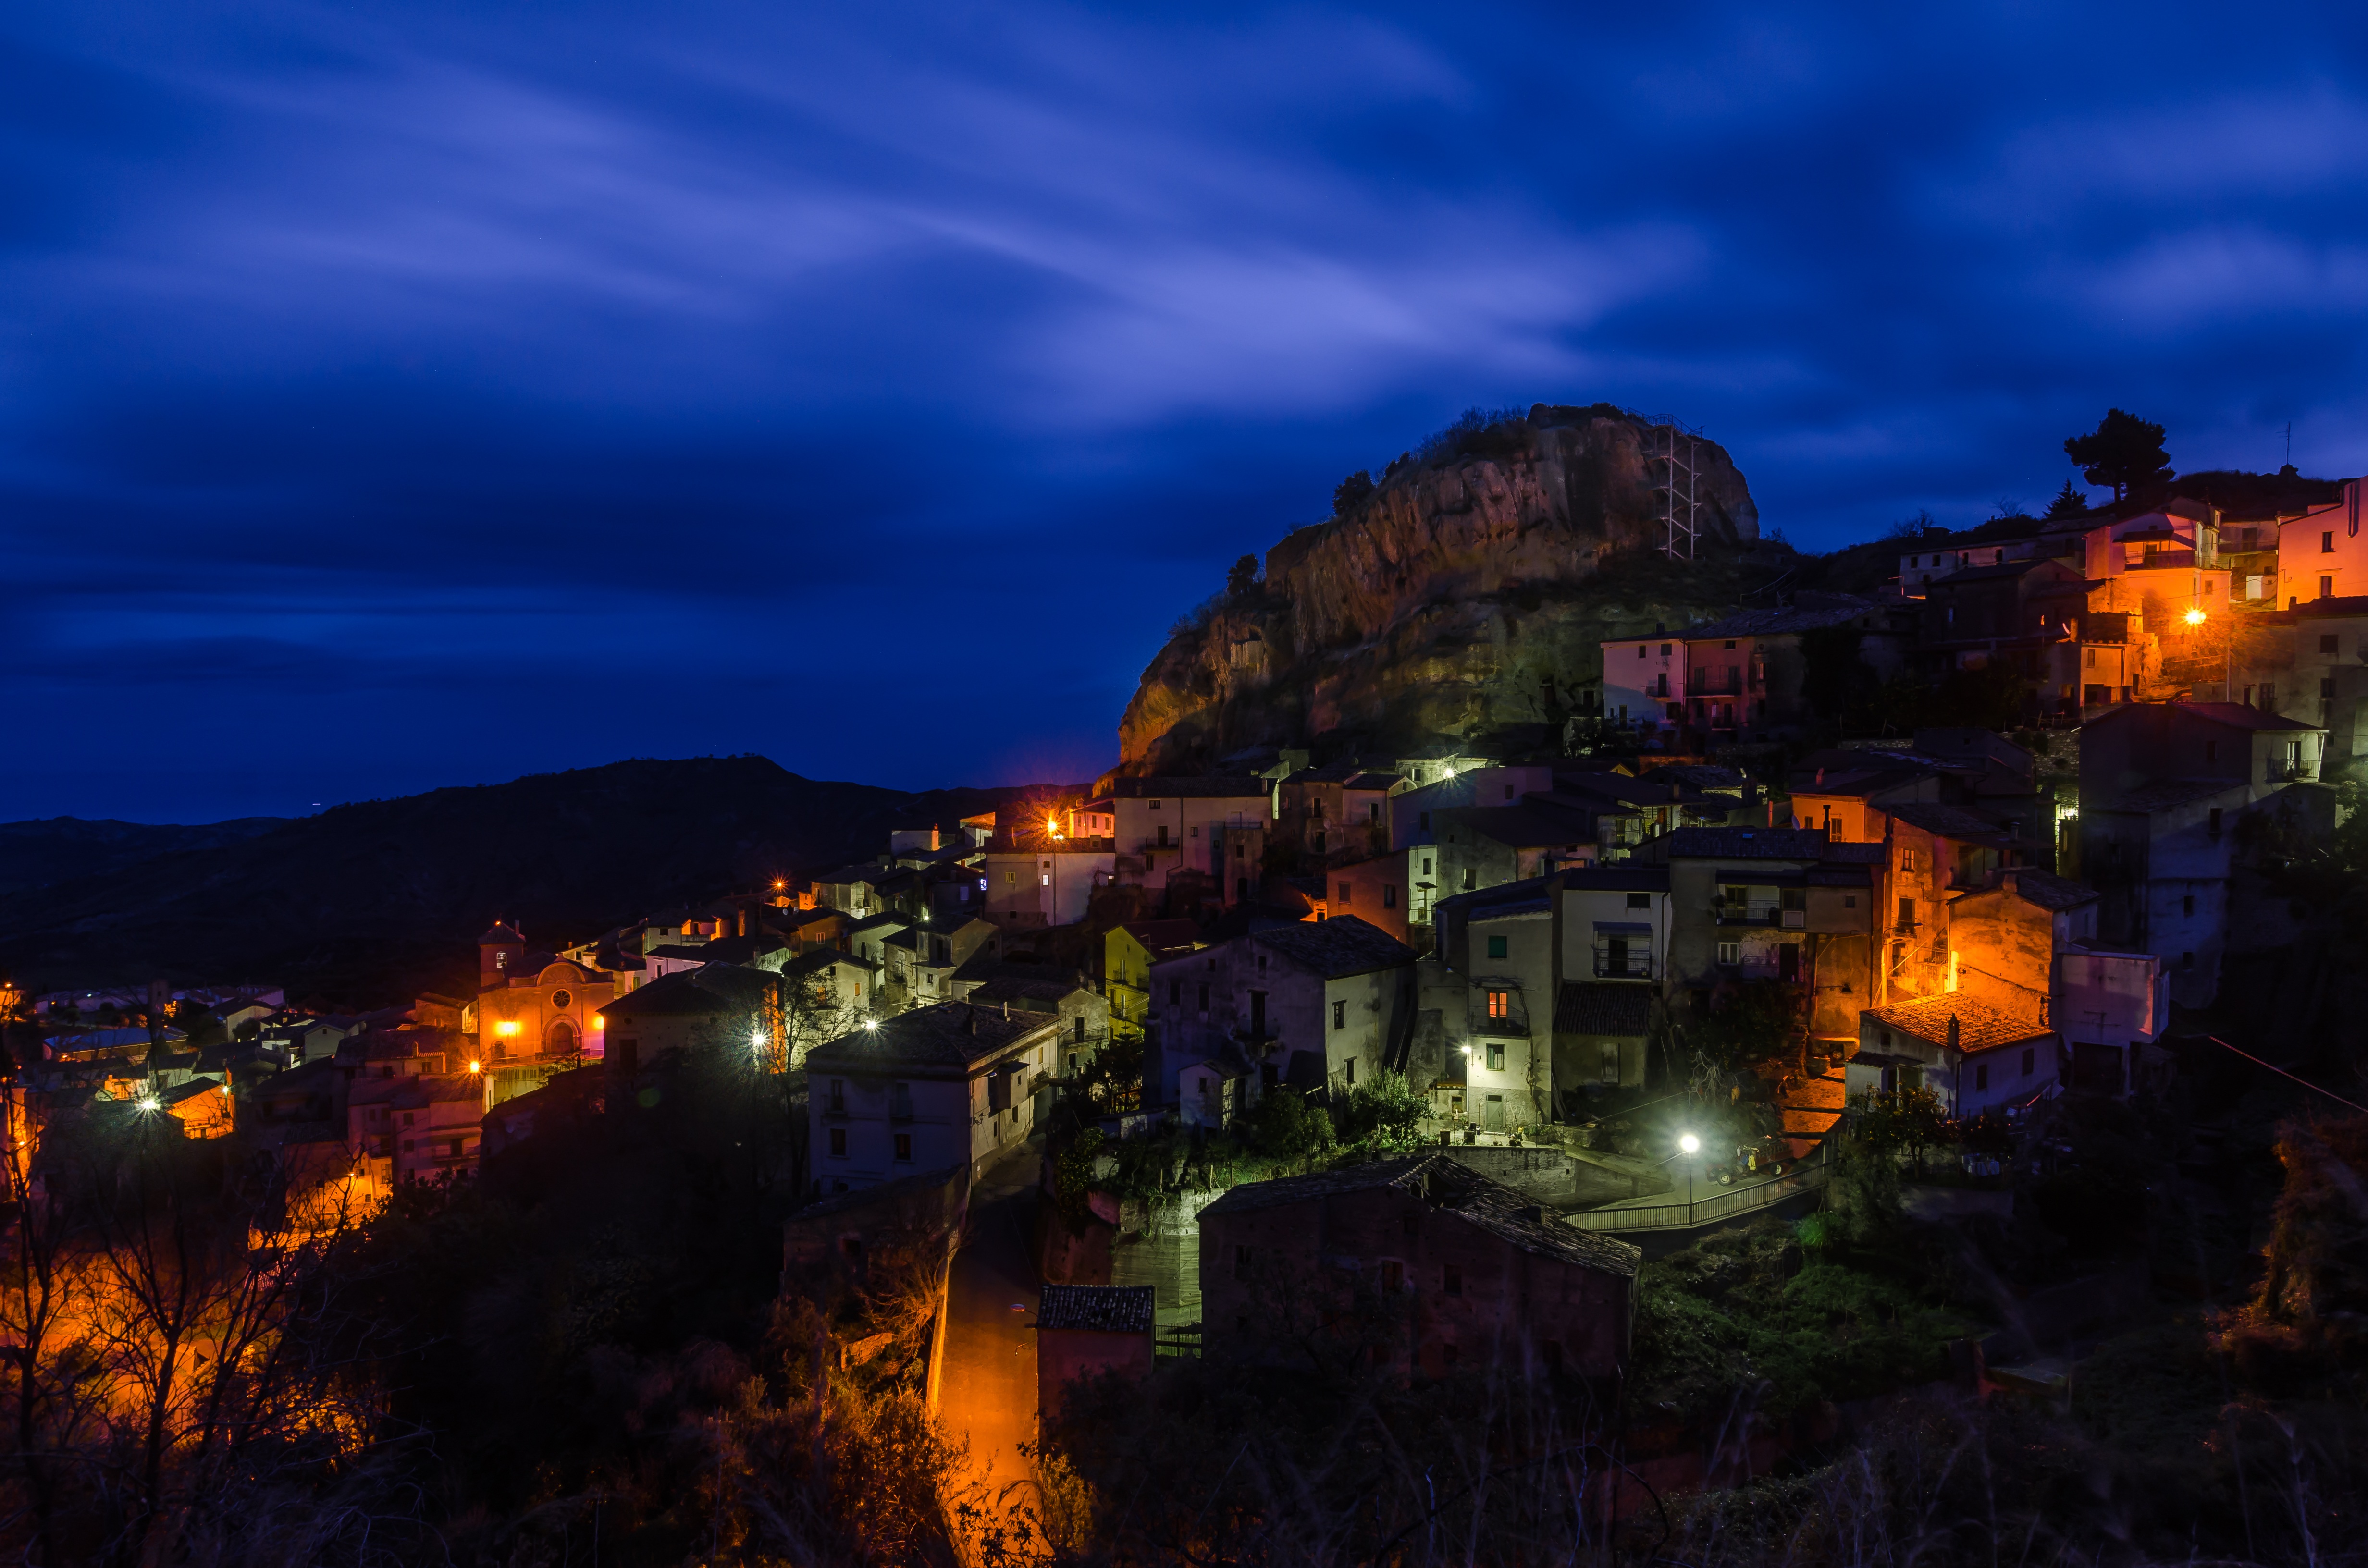 Calabria Night Italy Lights Landscape Clouds 4928x3264